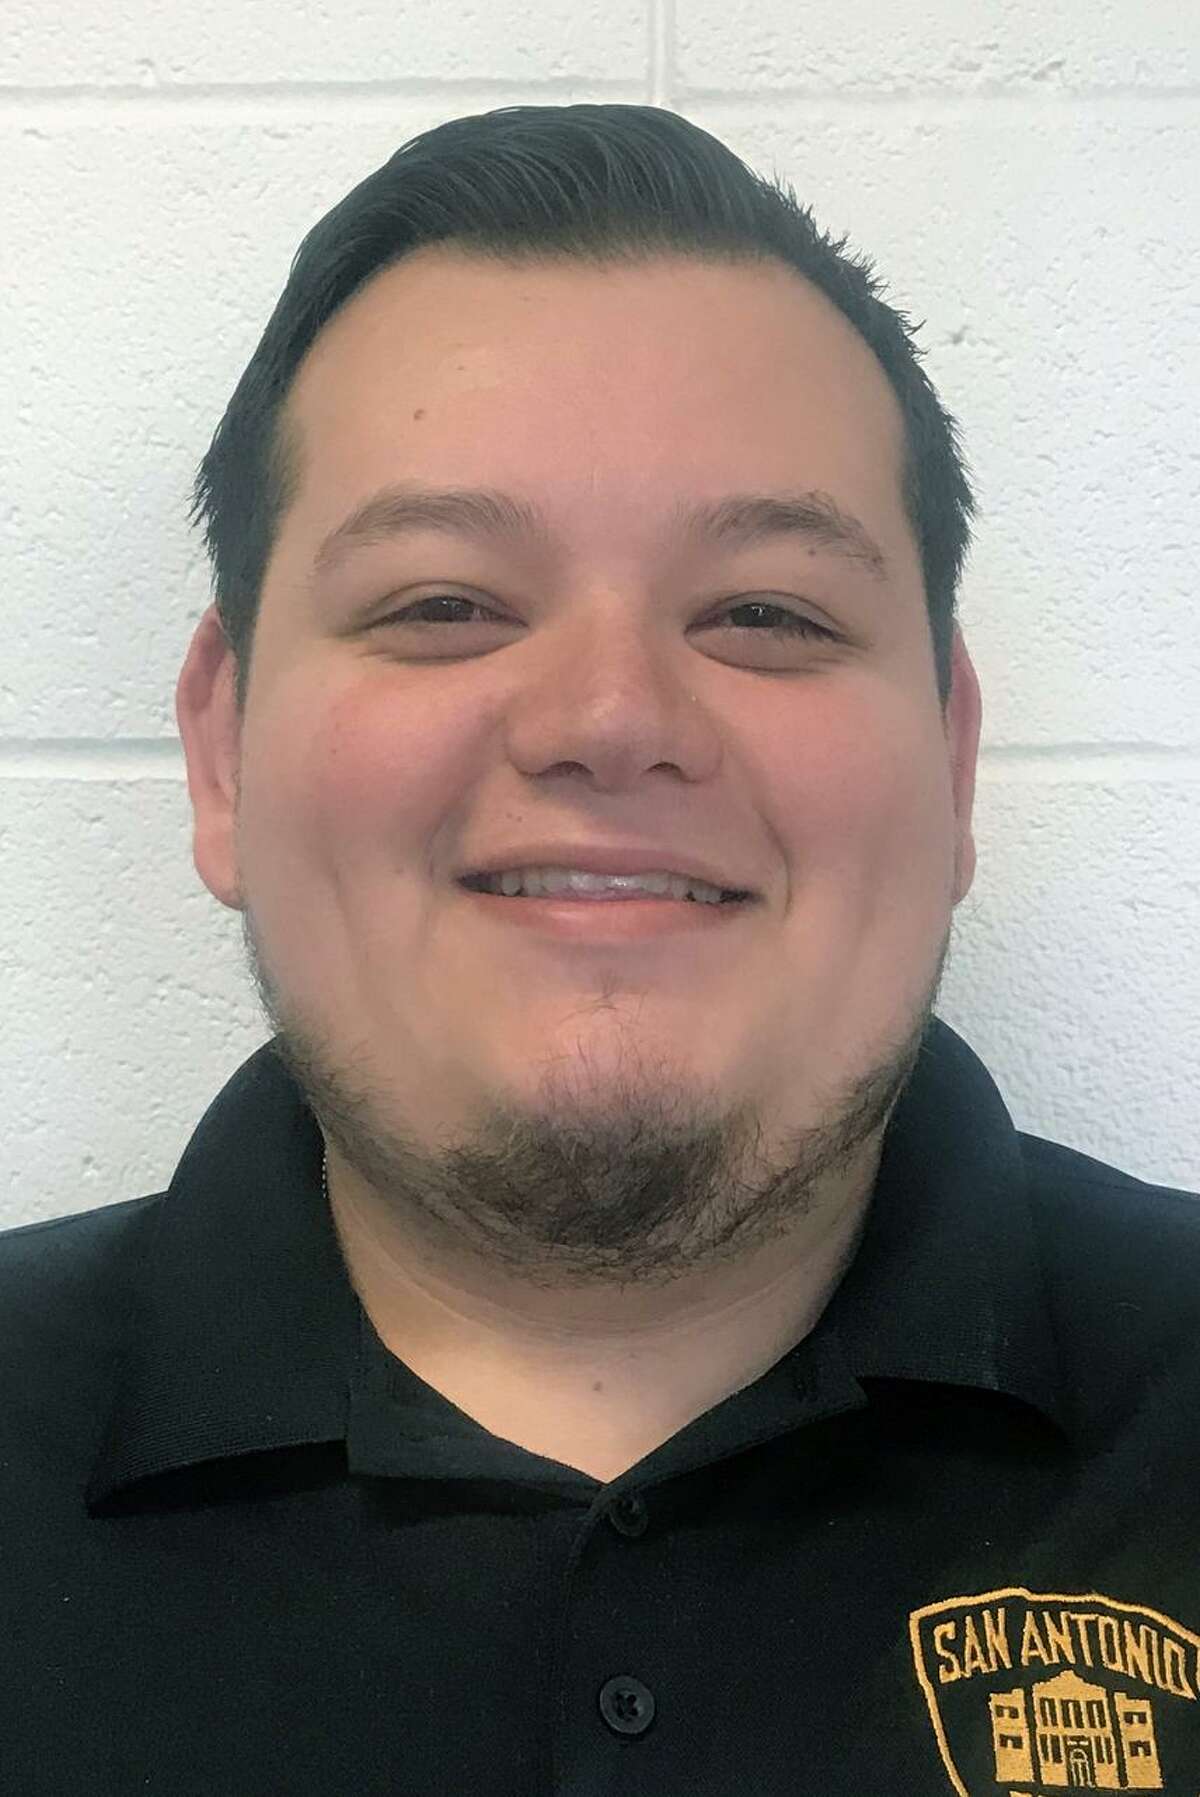 Lee Martinez Jr., 24, is running for Place 7 on the Harlandale ISD board in the May 4 election.